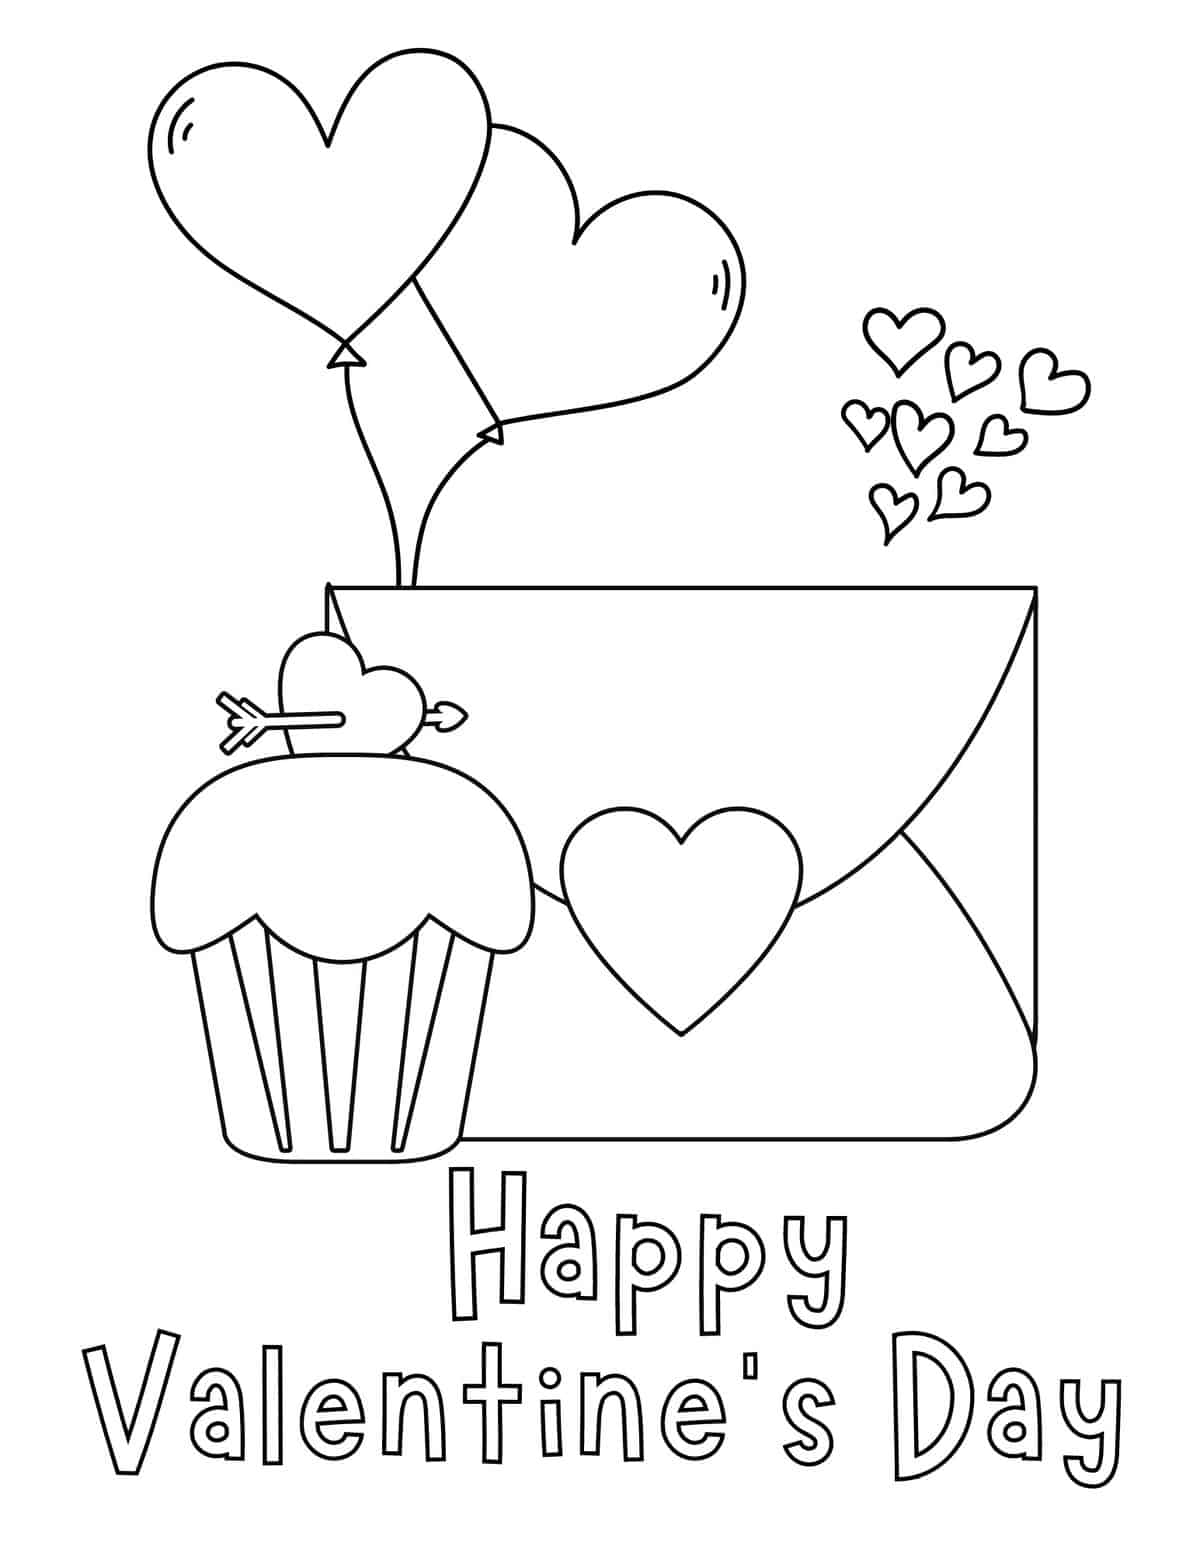 happy Valentine's Day coloring sheet